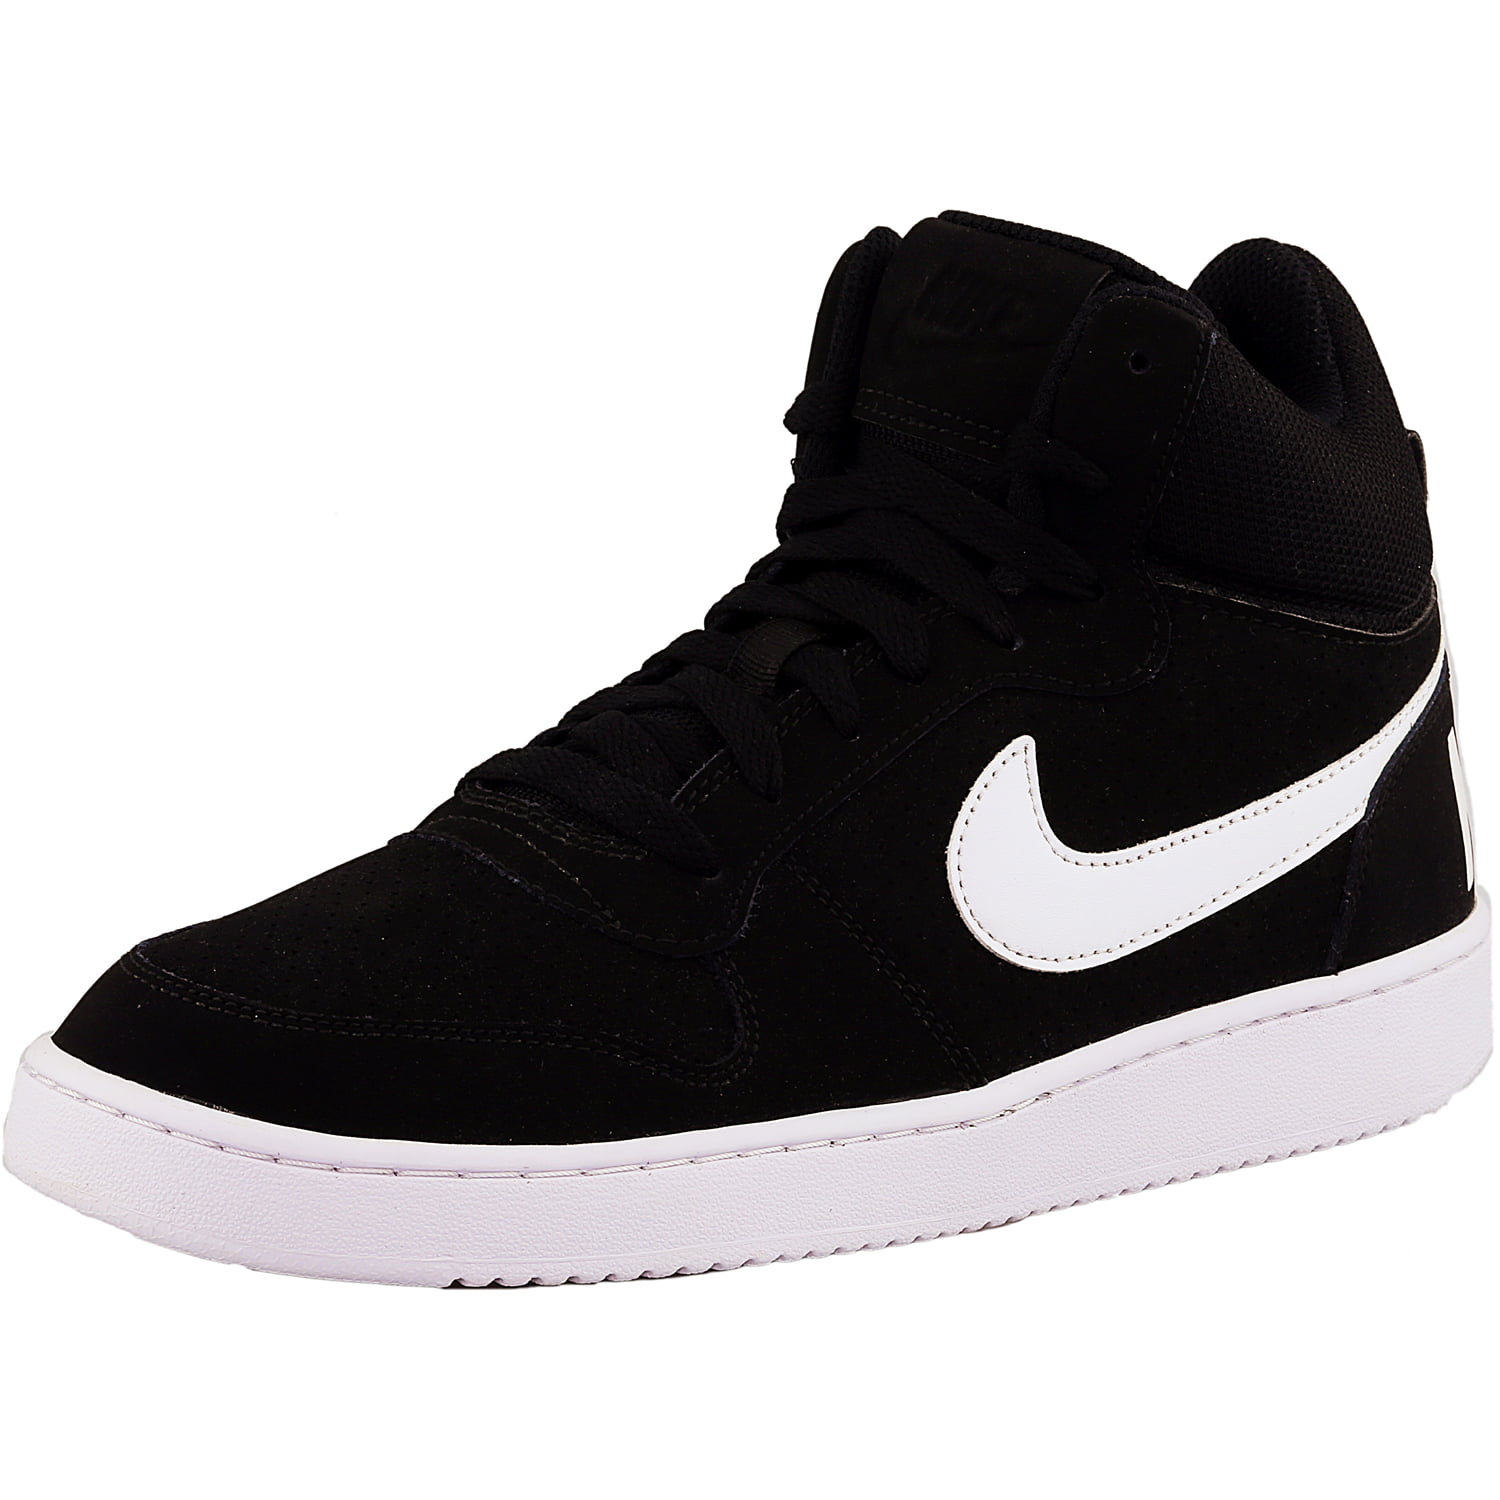 Nike Men's Court Borough Mid 010 Mid-Top Leather Basketball Shoe - 9M ...